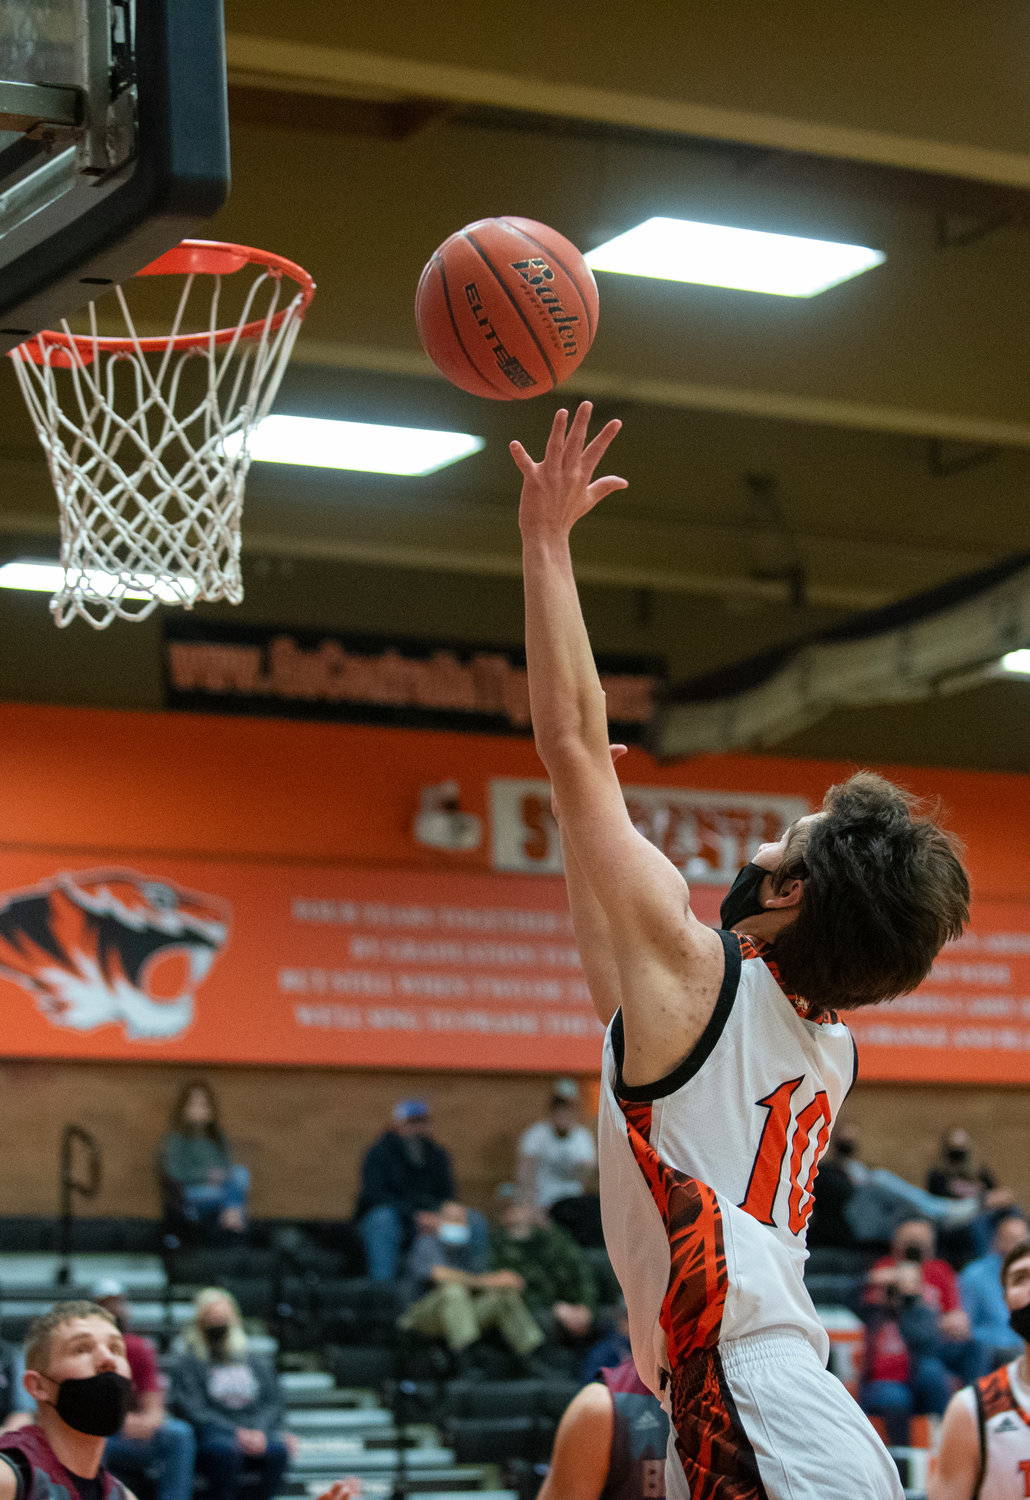 Centralia's Brandon Yeung knocks in a layup against W.F. West on Monday.